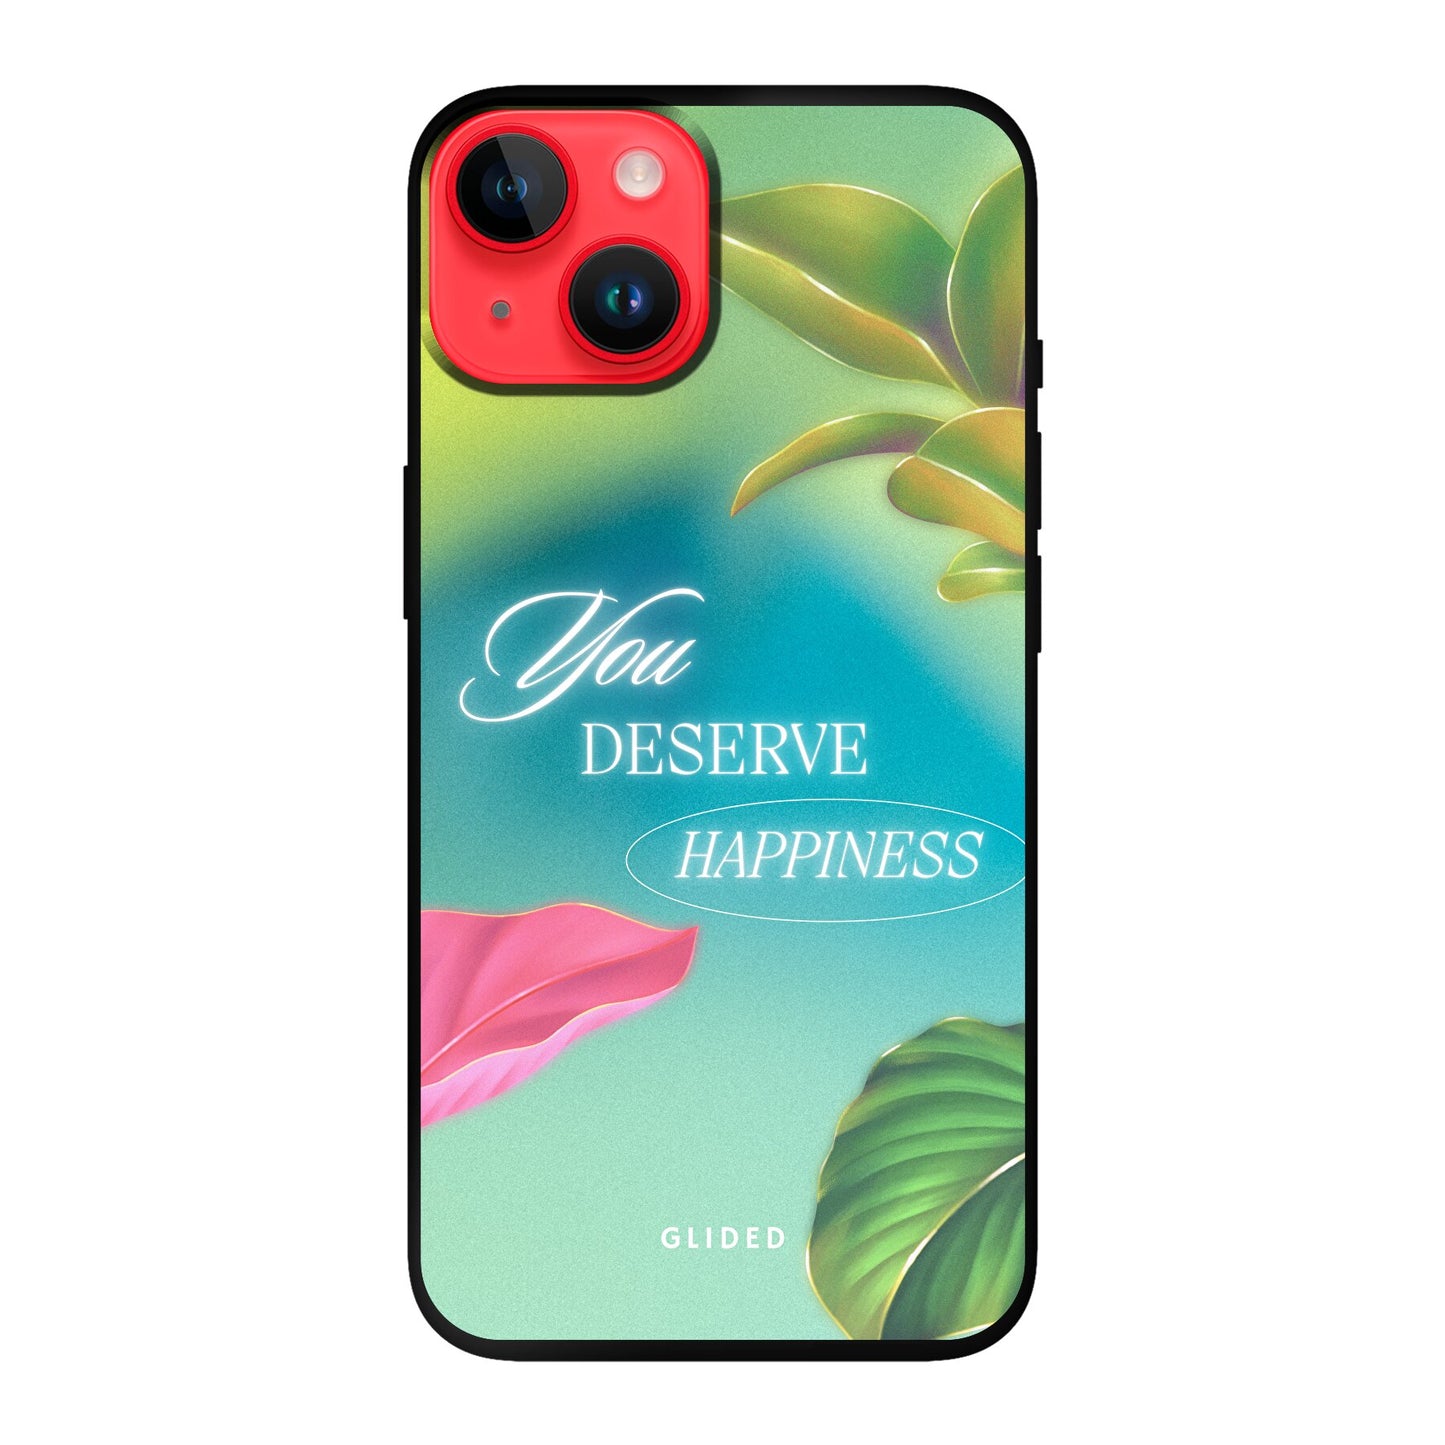 Happiness - iPhone 14 - Soft case